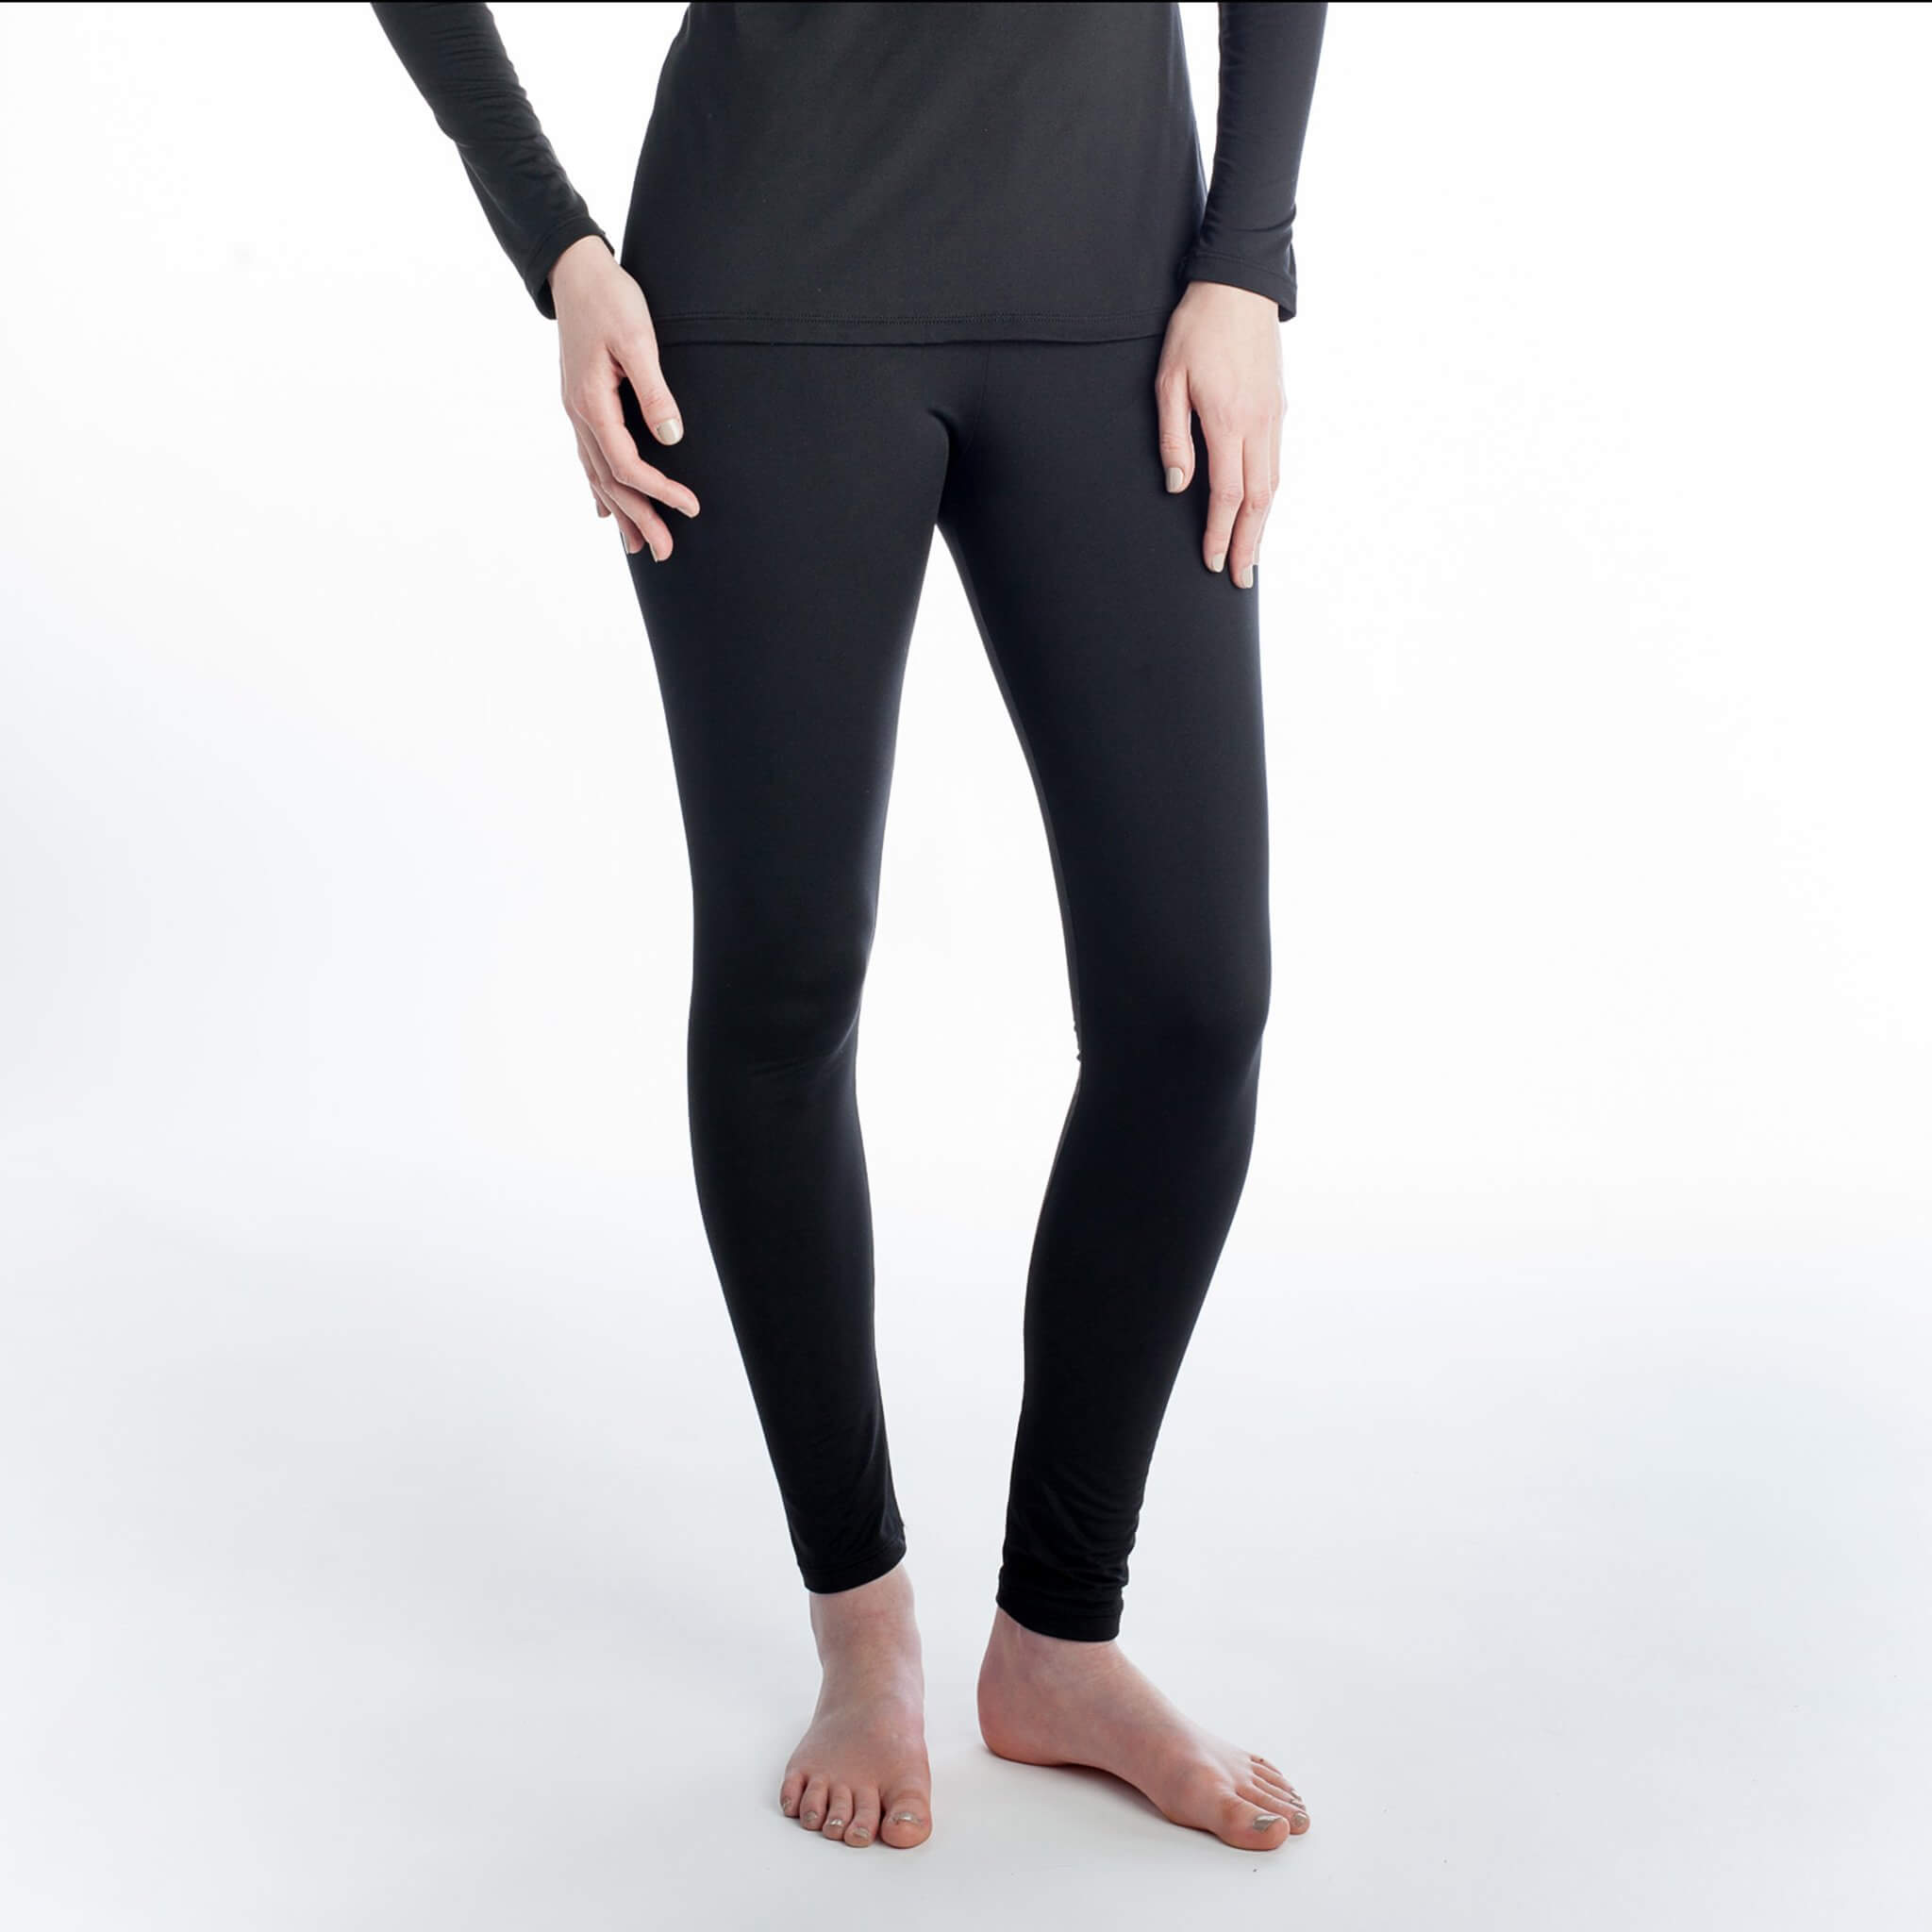 Women's Leggings Chill Chasers Collection (Merino Wool